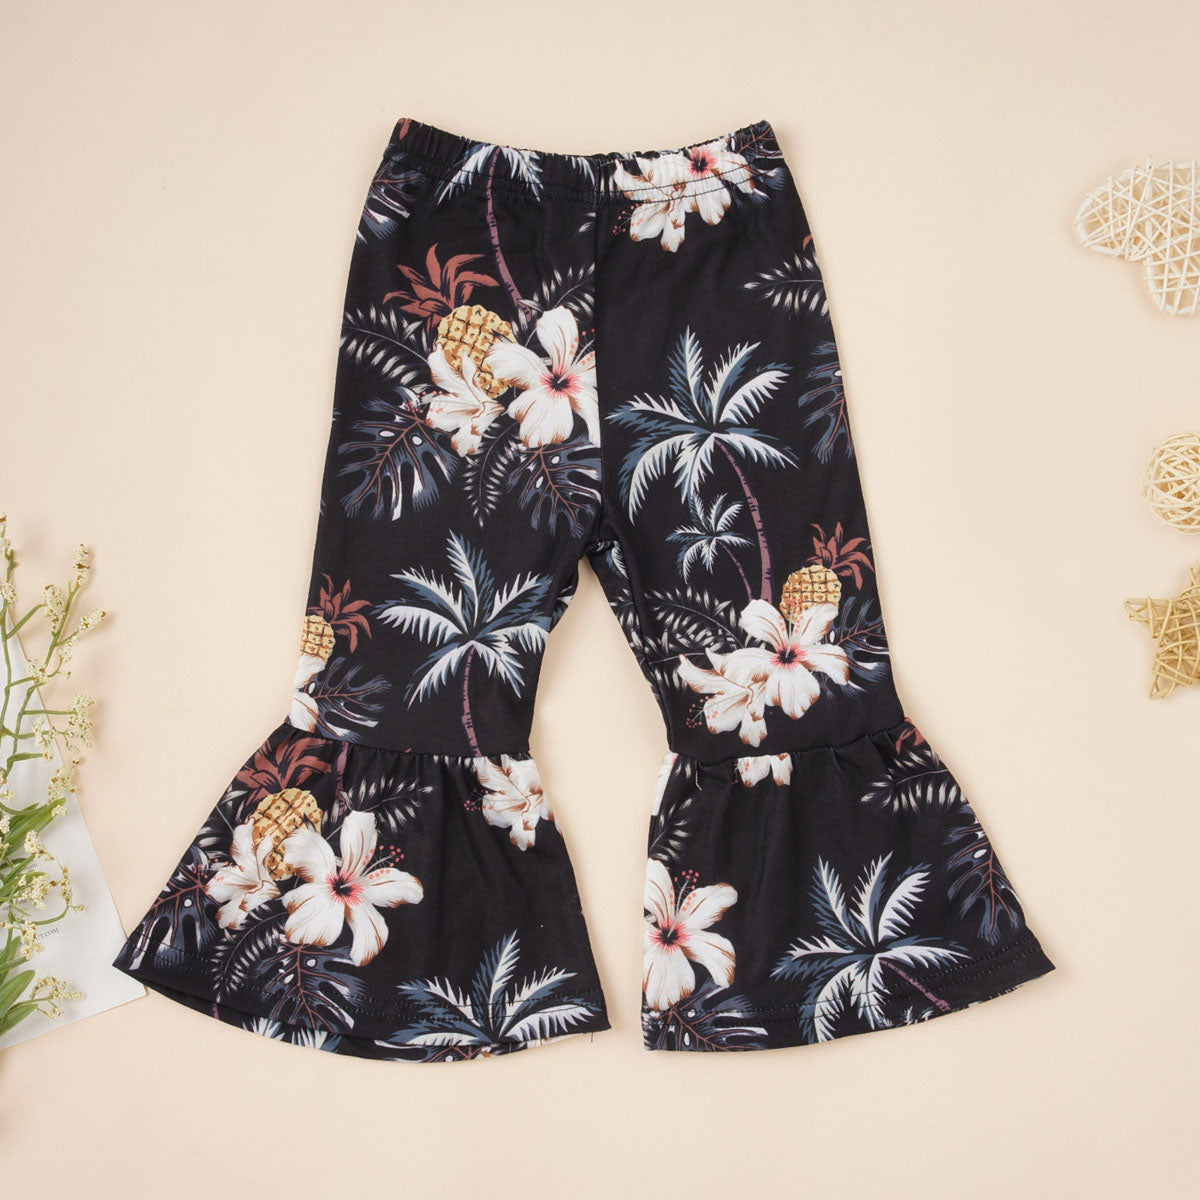 HELLO SUMMER Graphic Top and Floral Flare Pants Set Trendsi